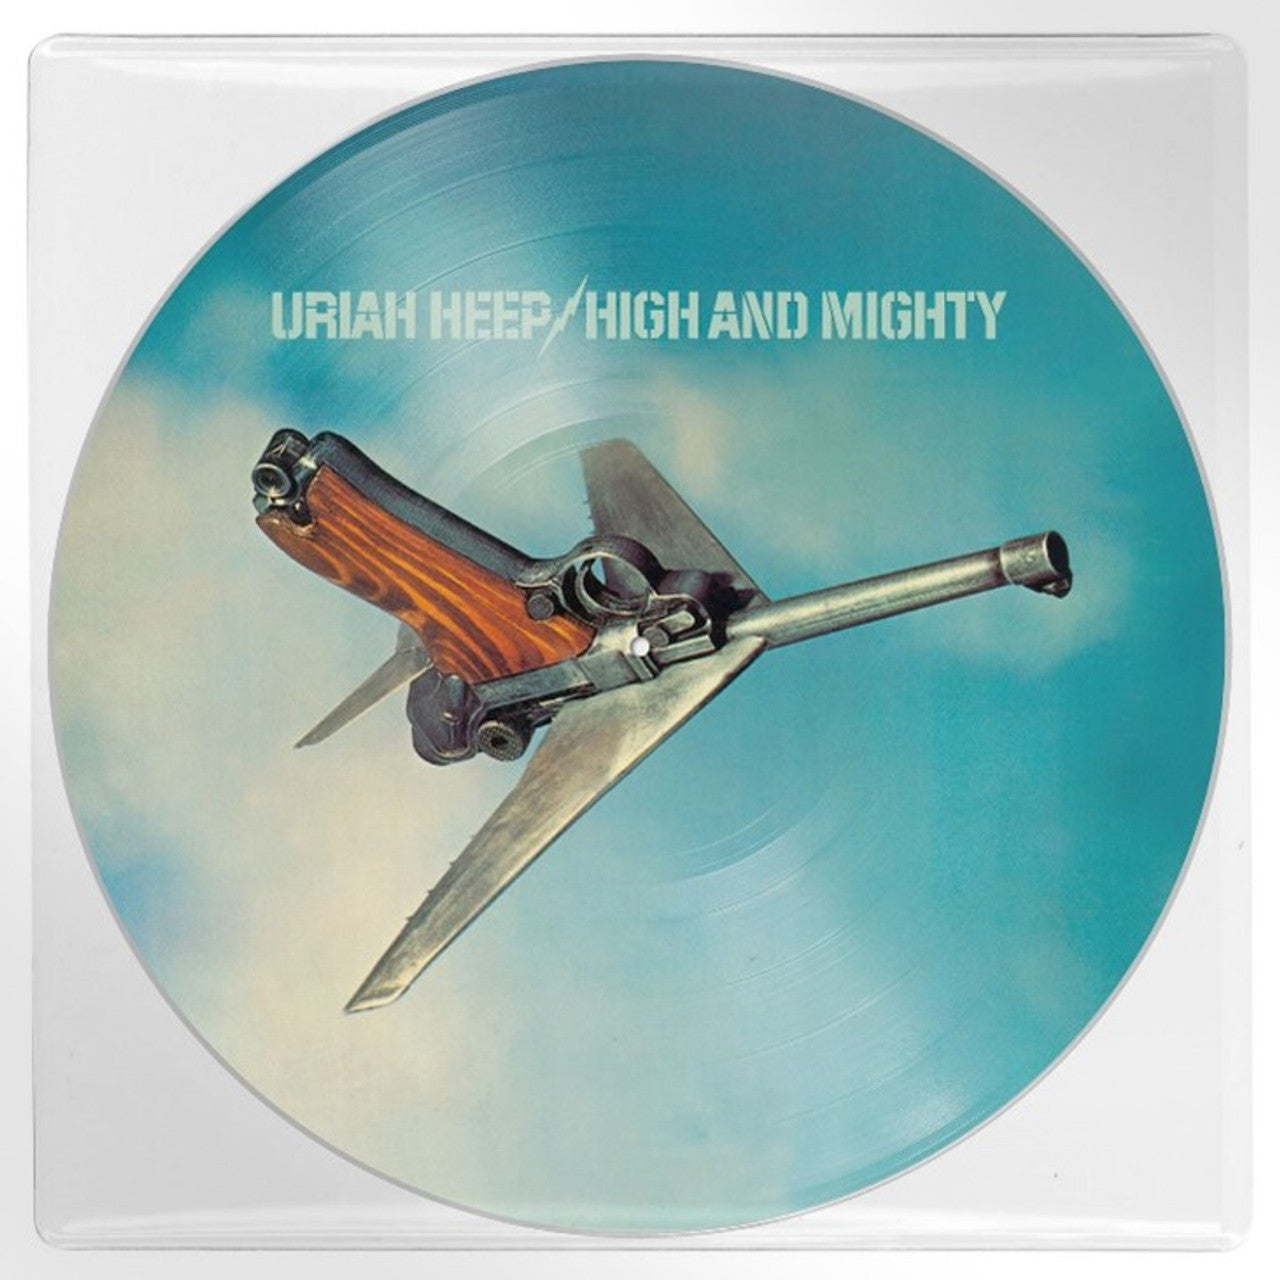 URIAH HEEP 'HIGH AND MIGHTY' LP (Picture Disc)